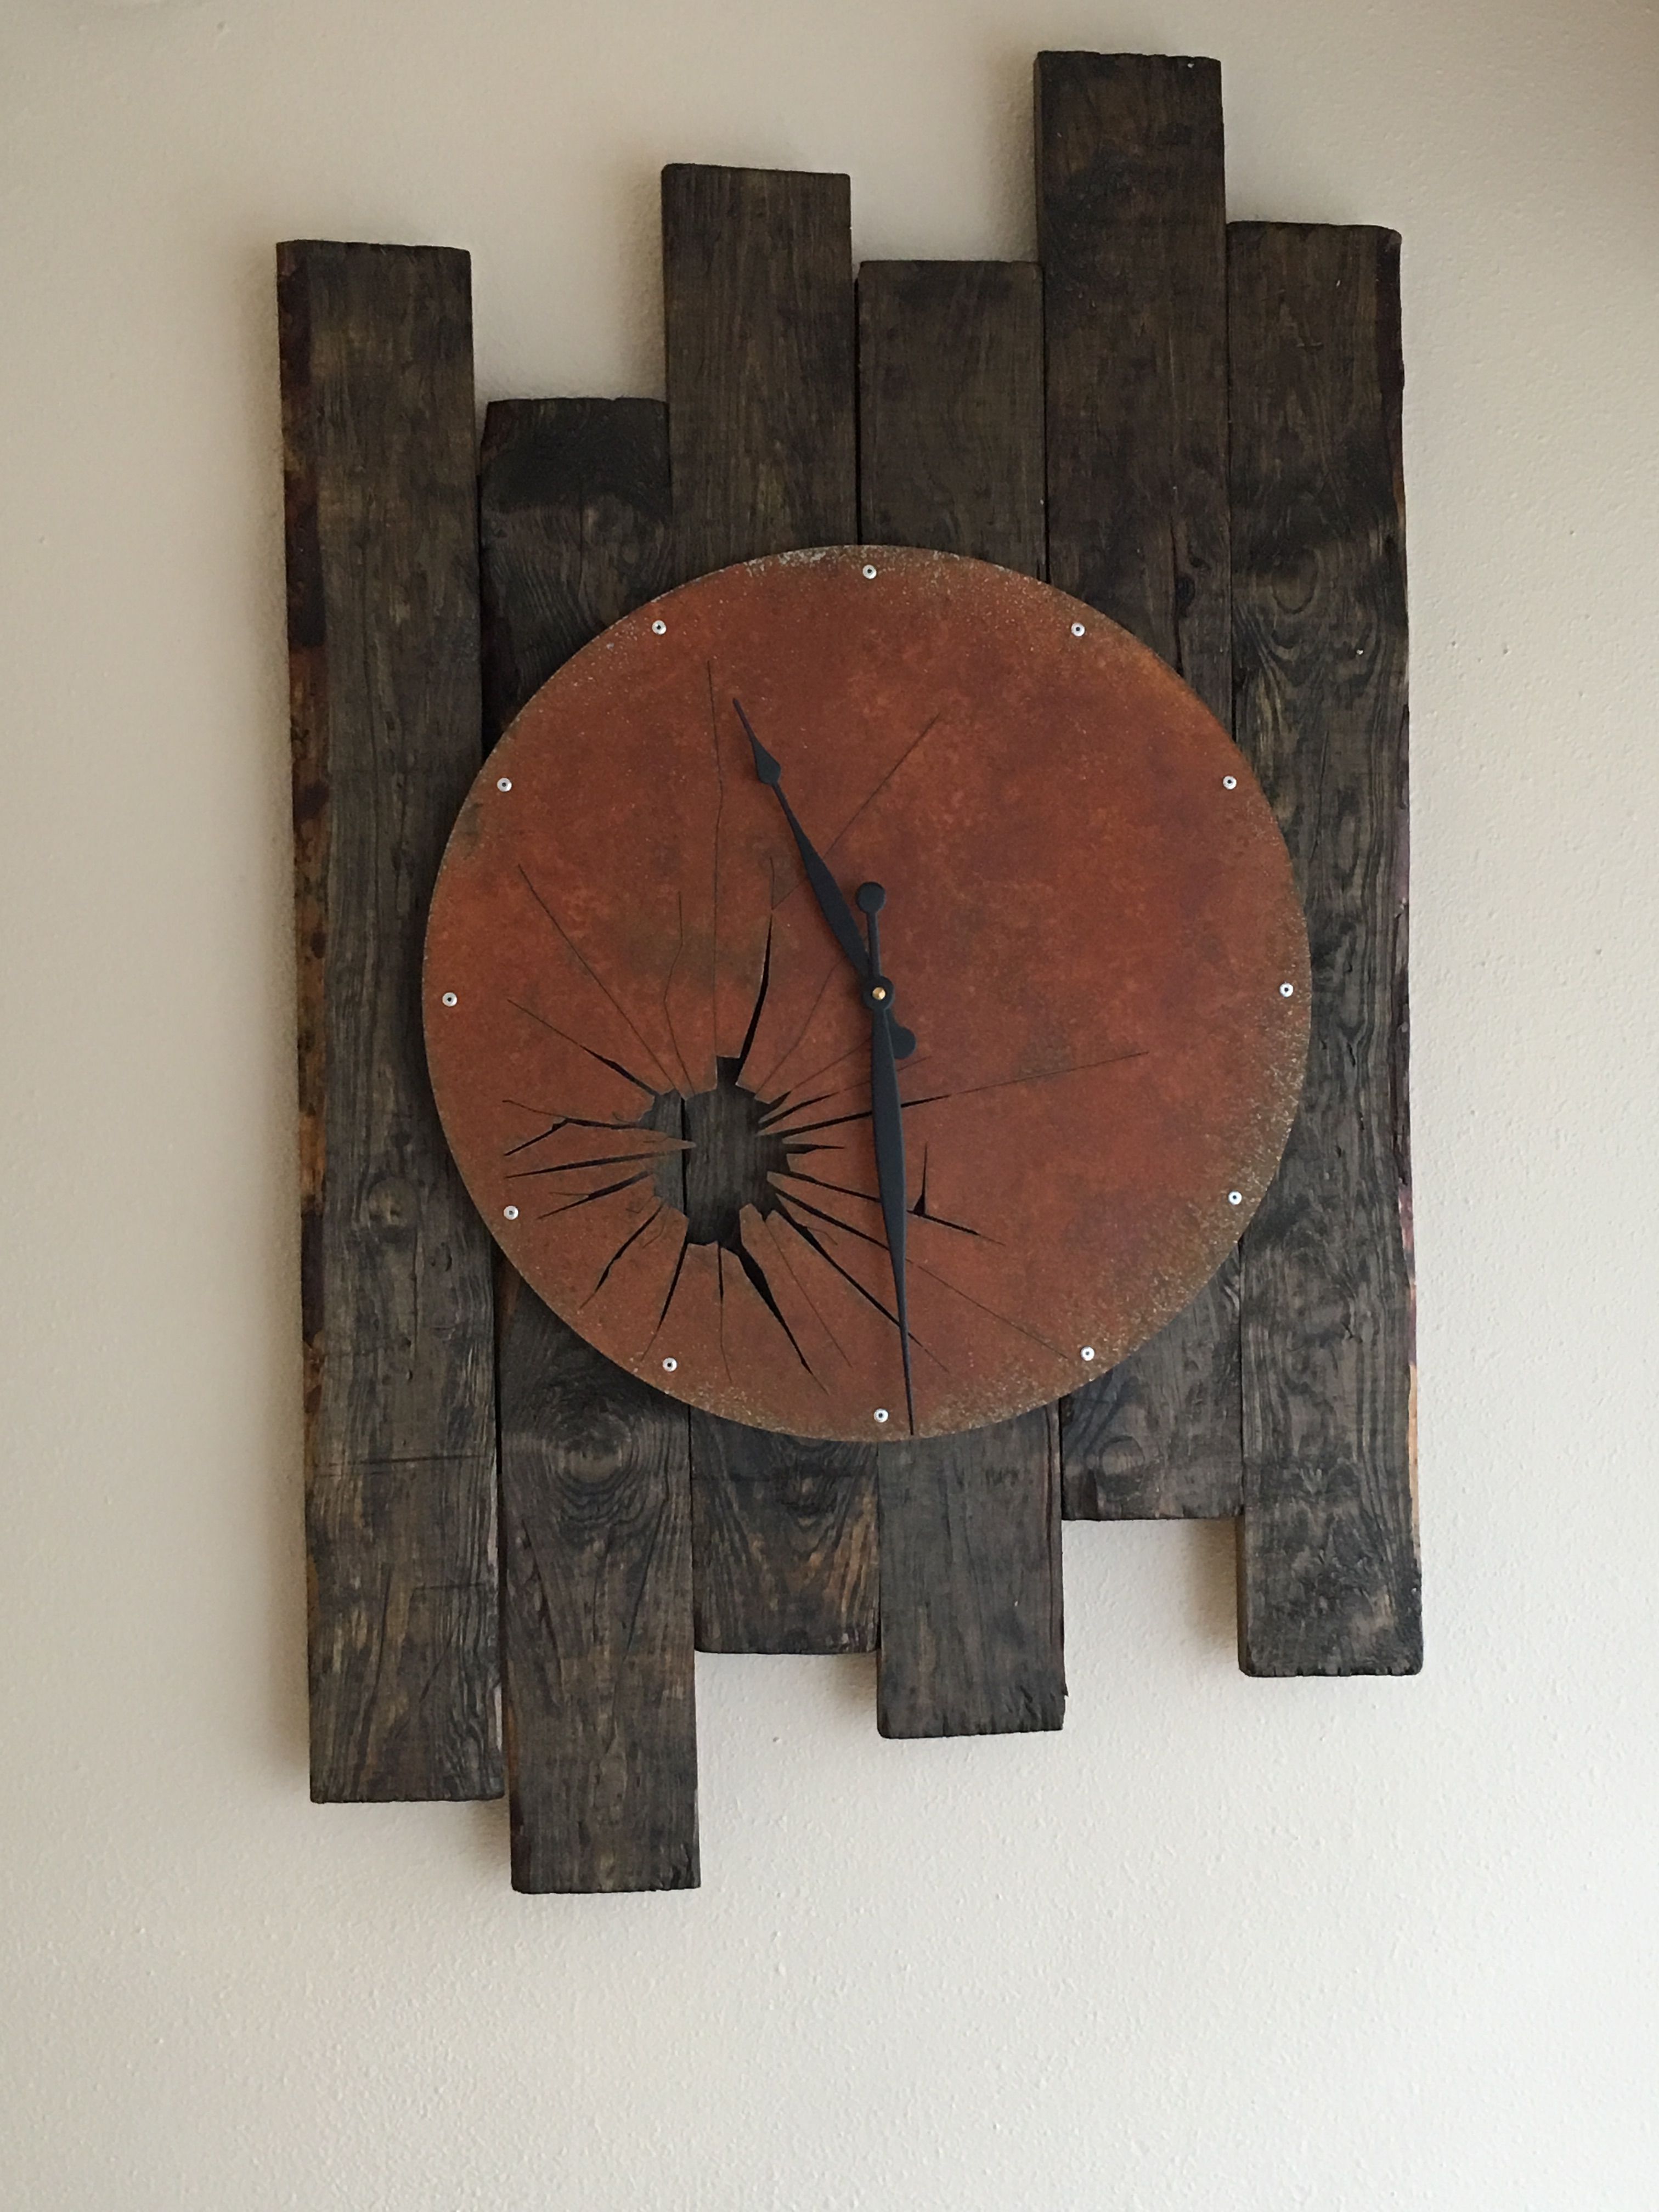 Distressed Wood Plank Wall Art With Clock. Shattered Metal Wall Throughout Newest Plank Wall Art (Gallery 19 of 20)